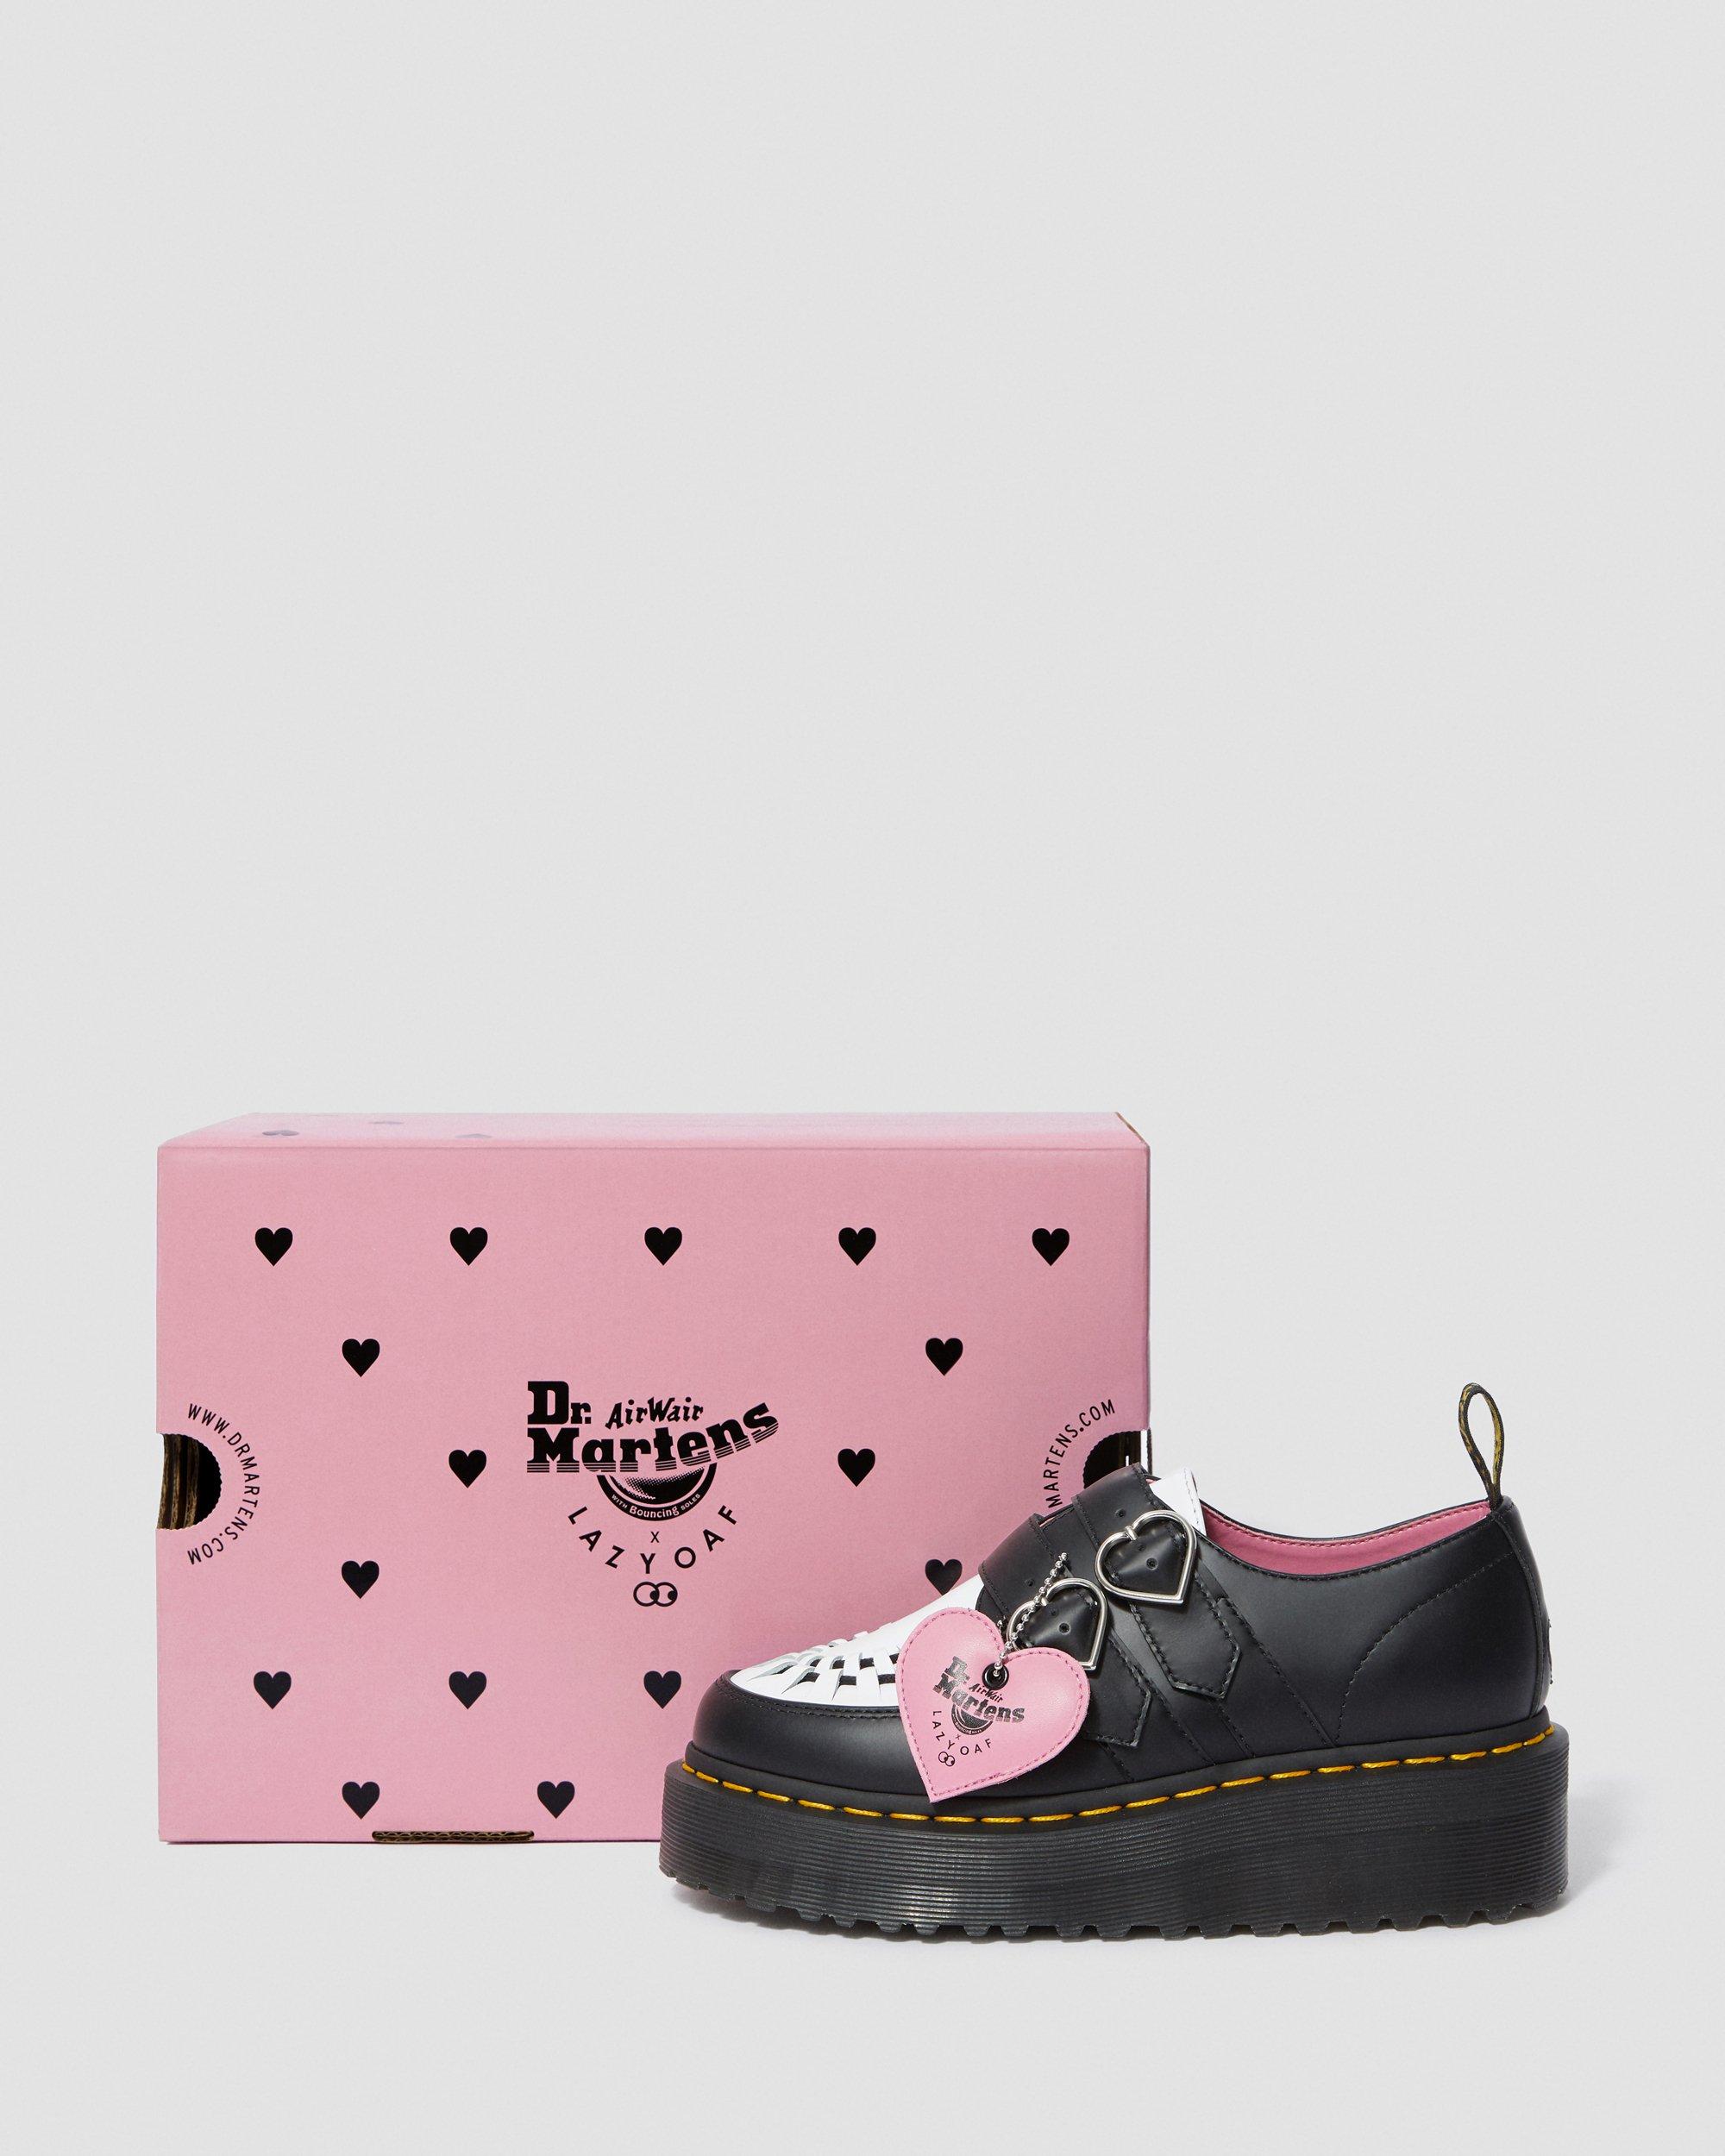 Buy > dr martens creepers > in stock